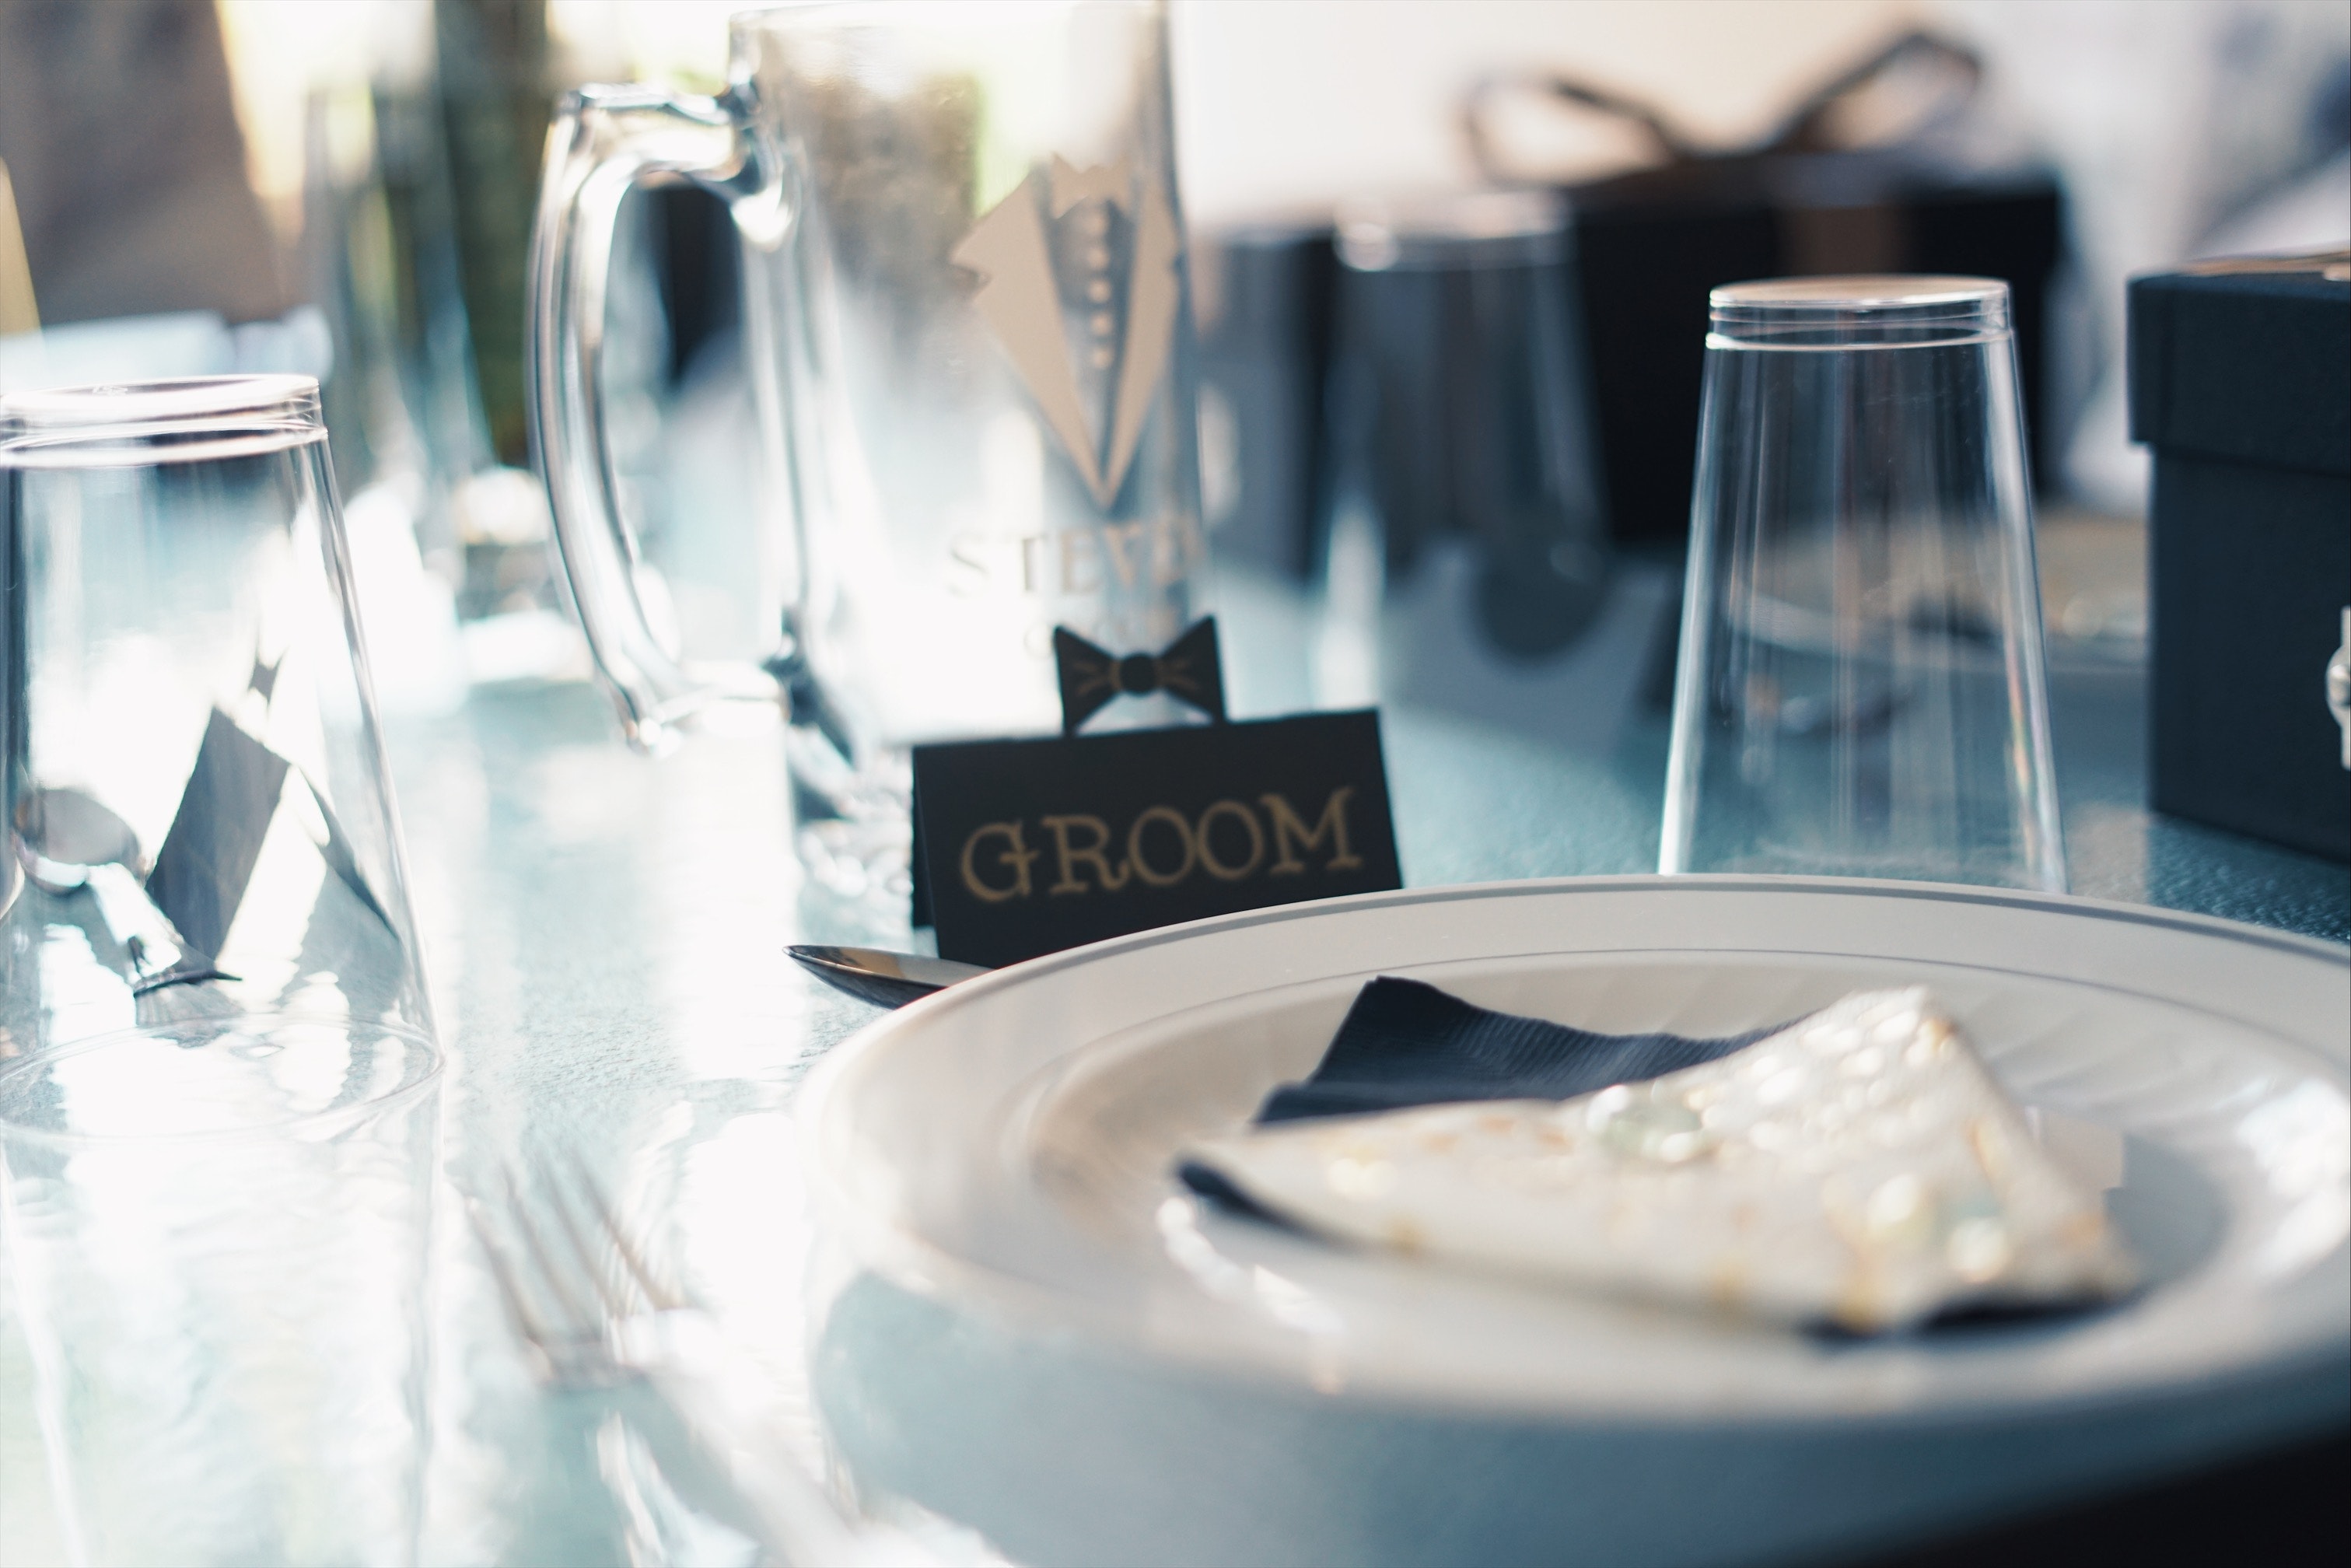 Round white ceramic plate near glass cups and groom sign | Source: Pexels